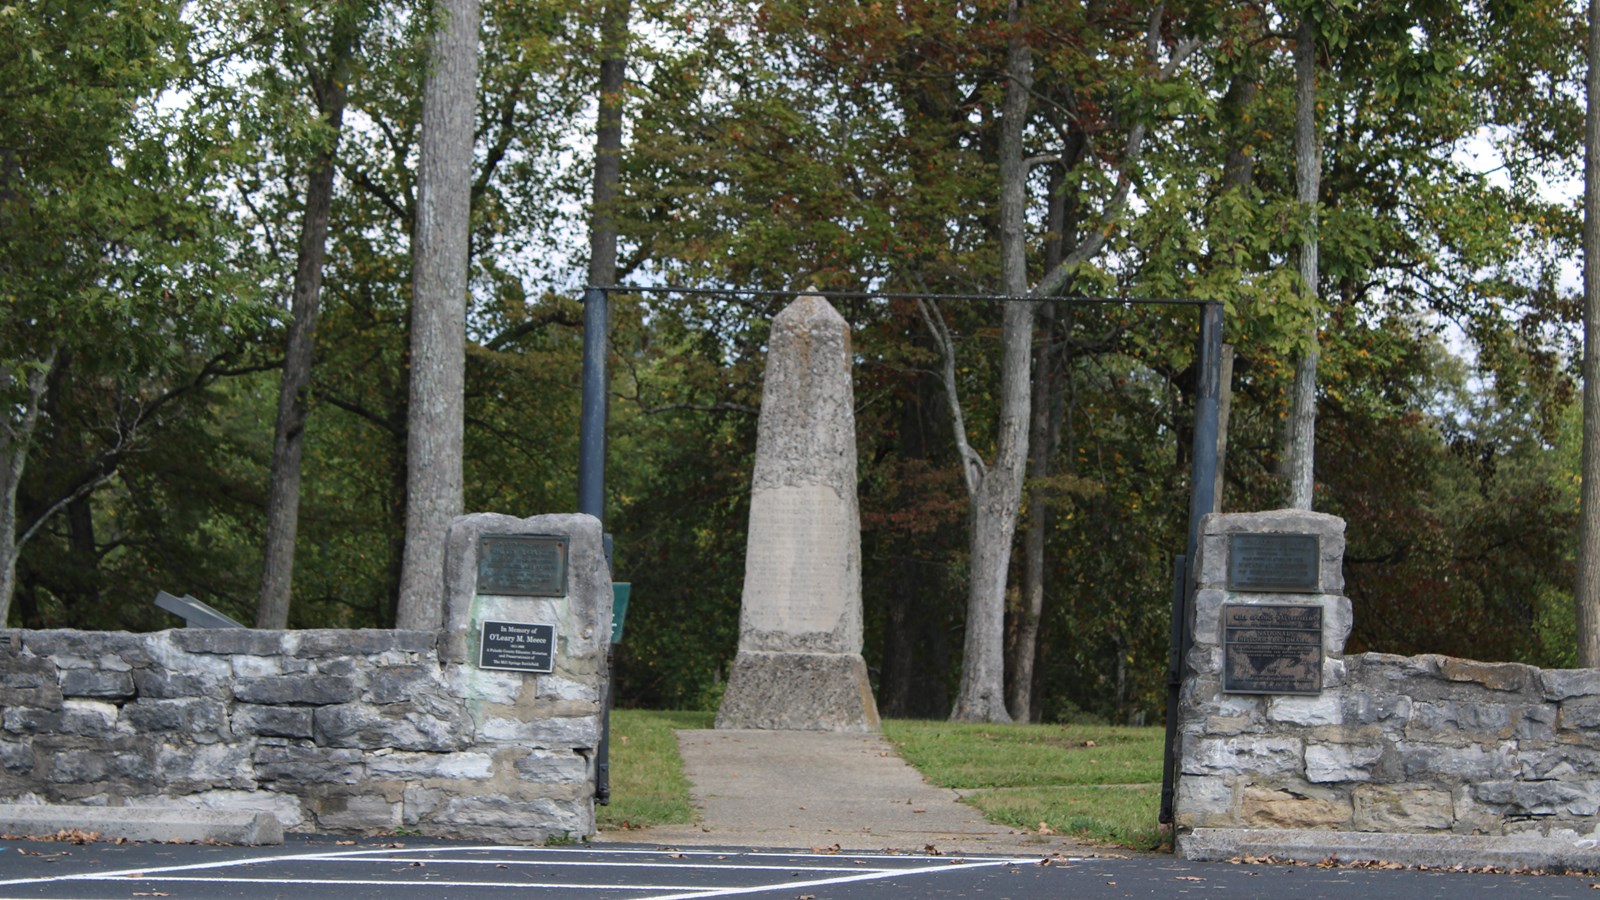 Parking lot in front of a historic wall and gate behind which is a small obelisk monument.